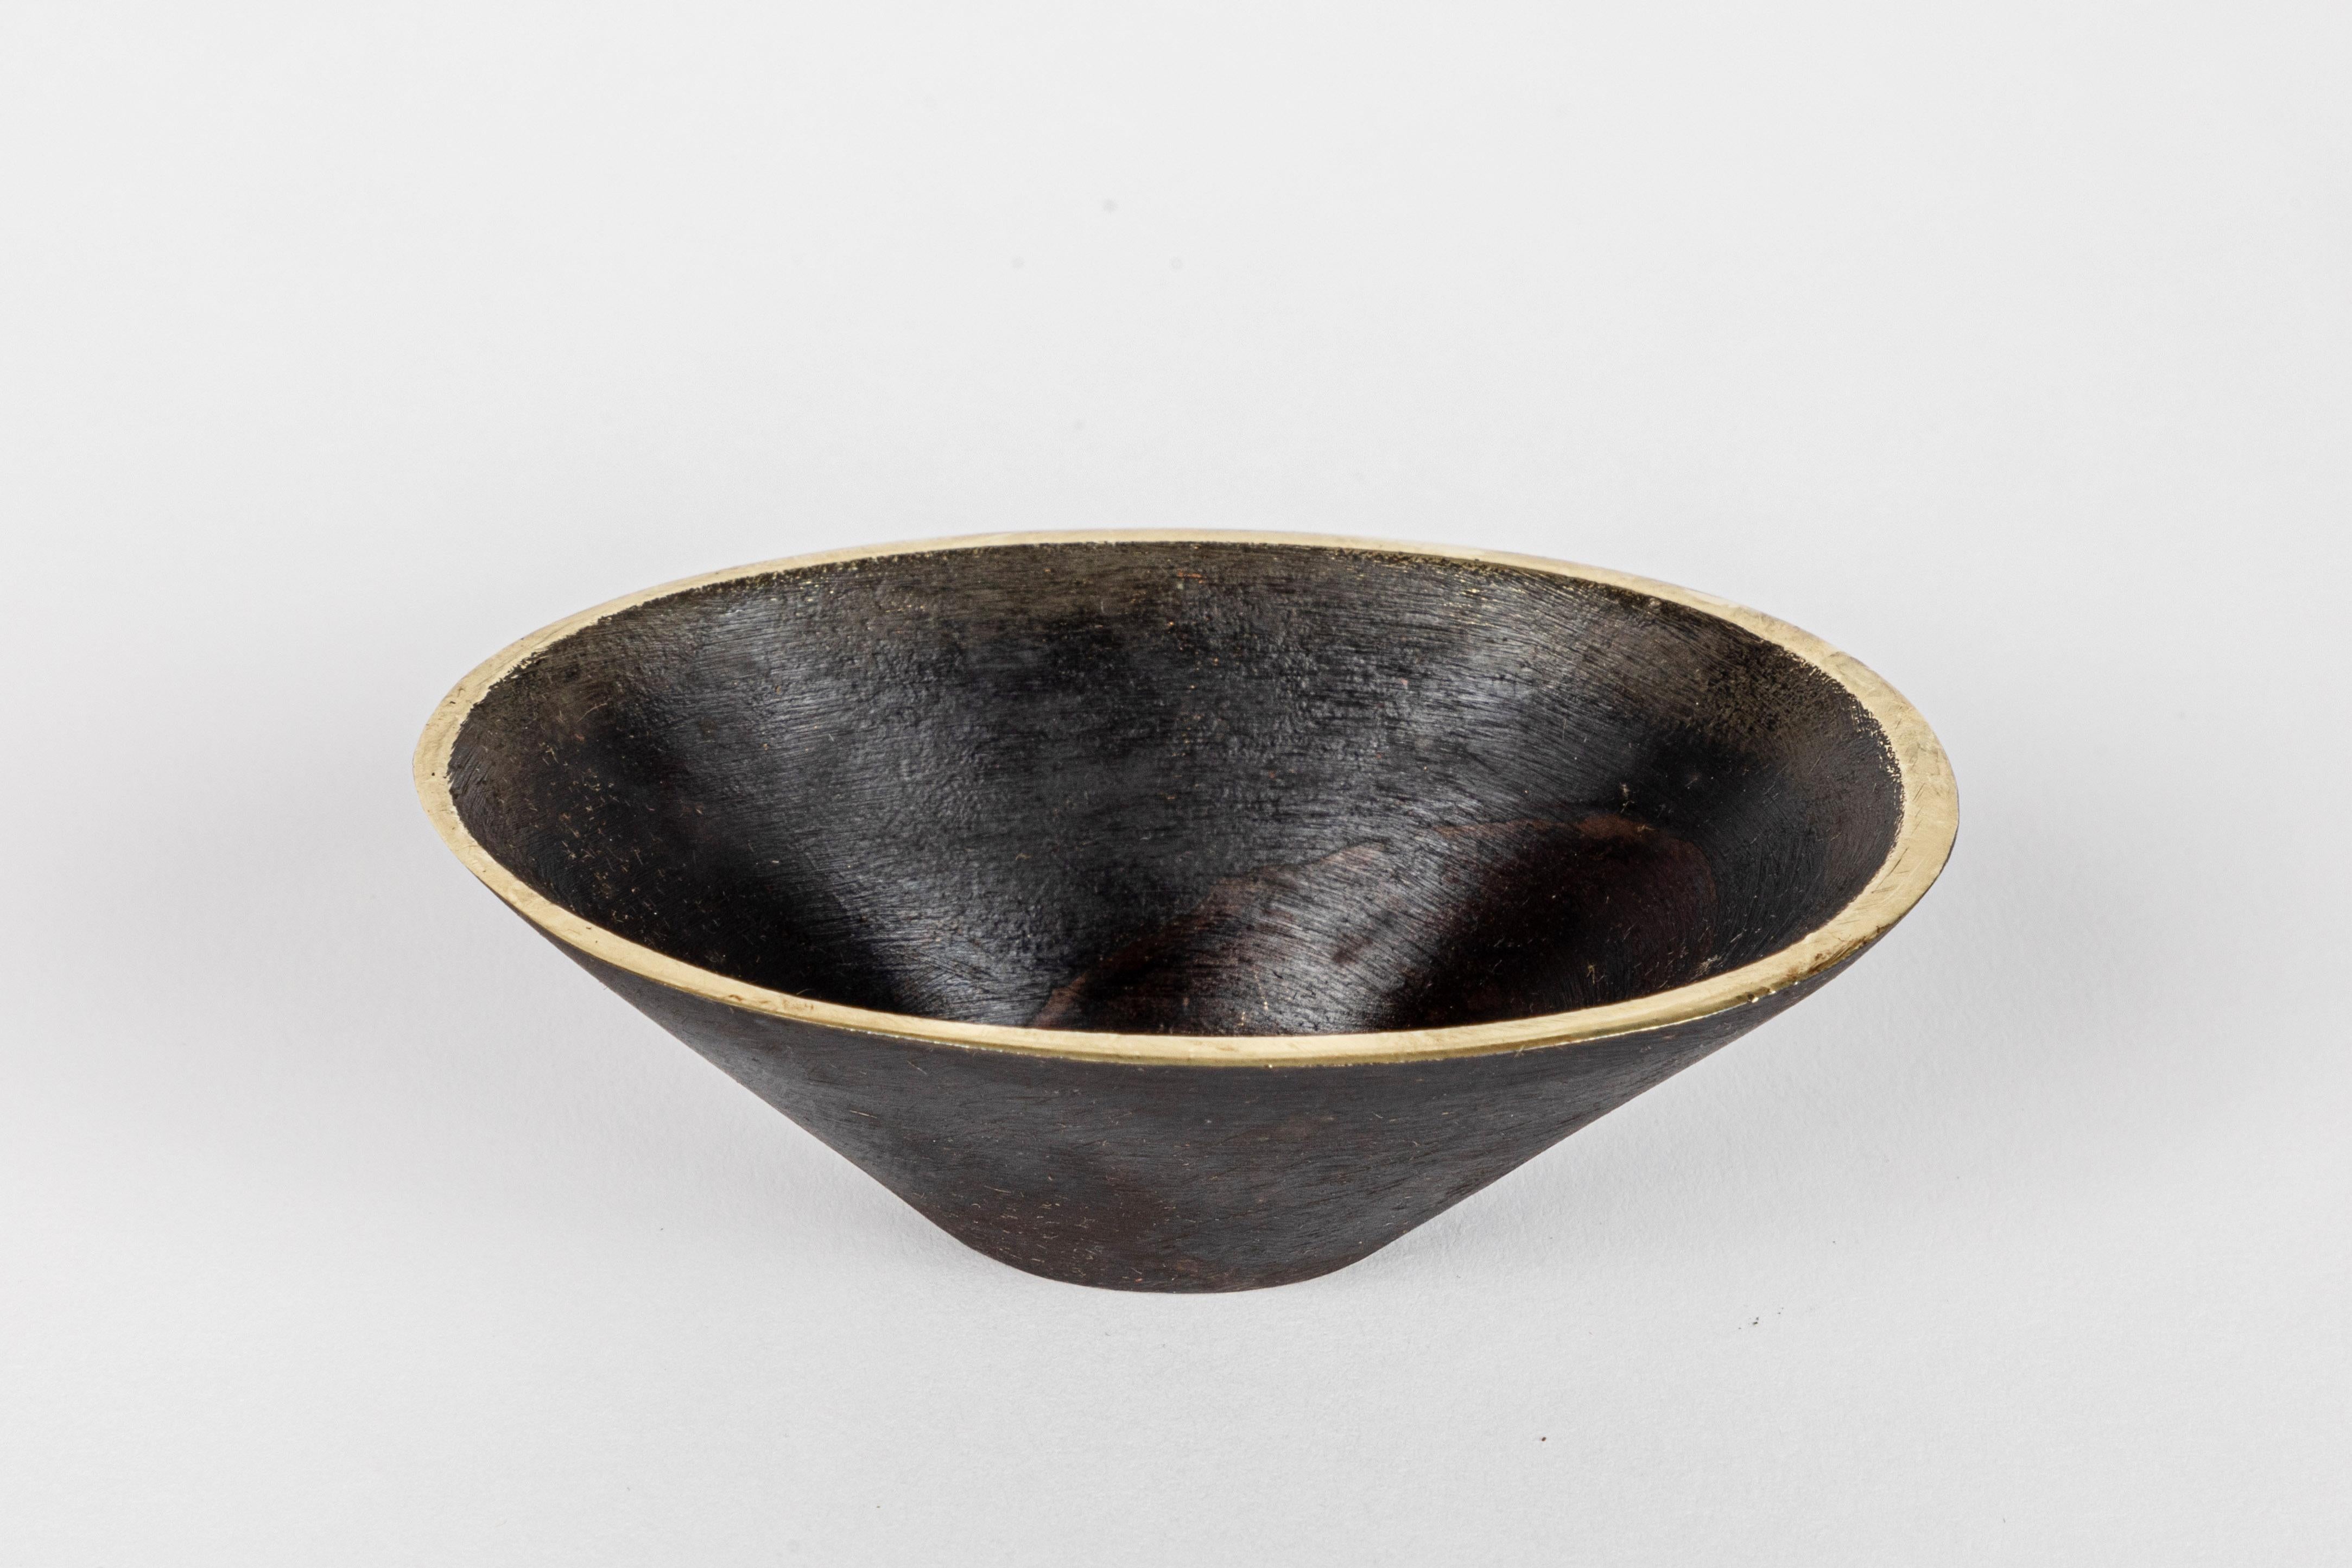 Carl Auböck model #4280 bowl in patinated brass. Designed in the 1950s, this incredibly refined and sculptural Viennese bowl is executed in patinated brass. Originally conceived as a petite bowl, this decorative vessel can be used for a variety of